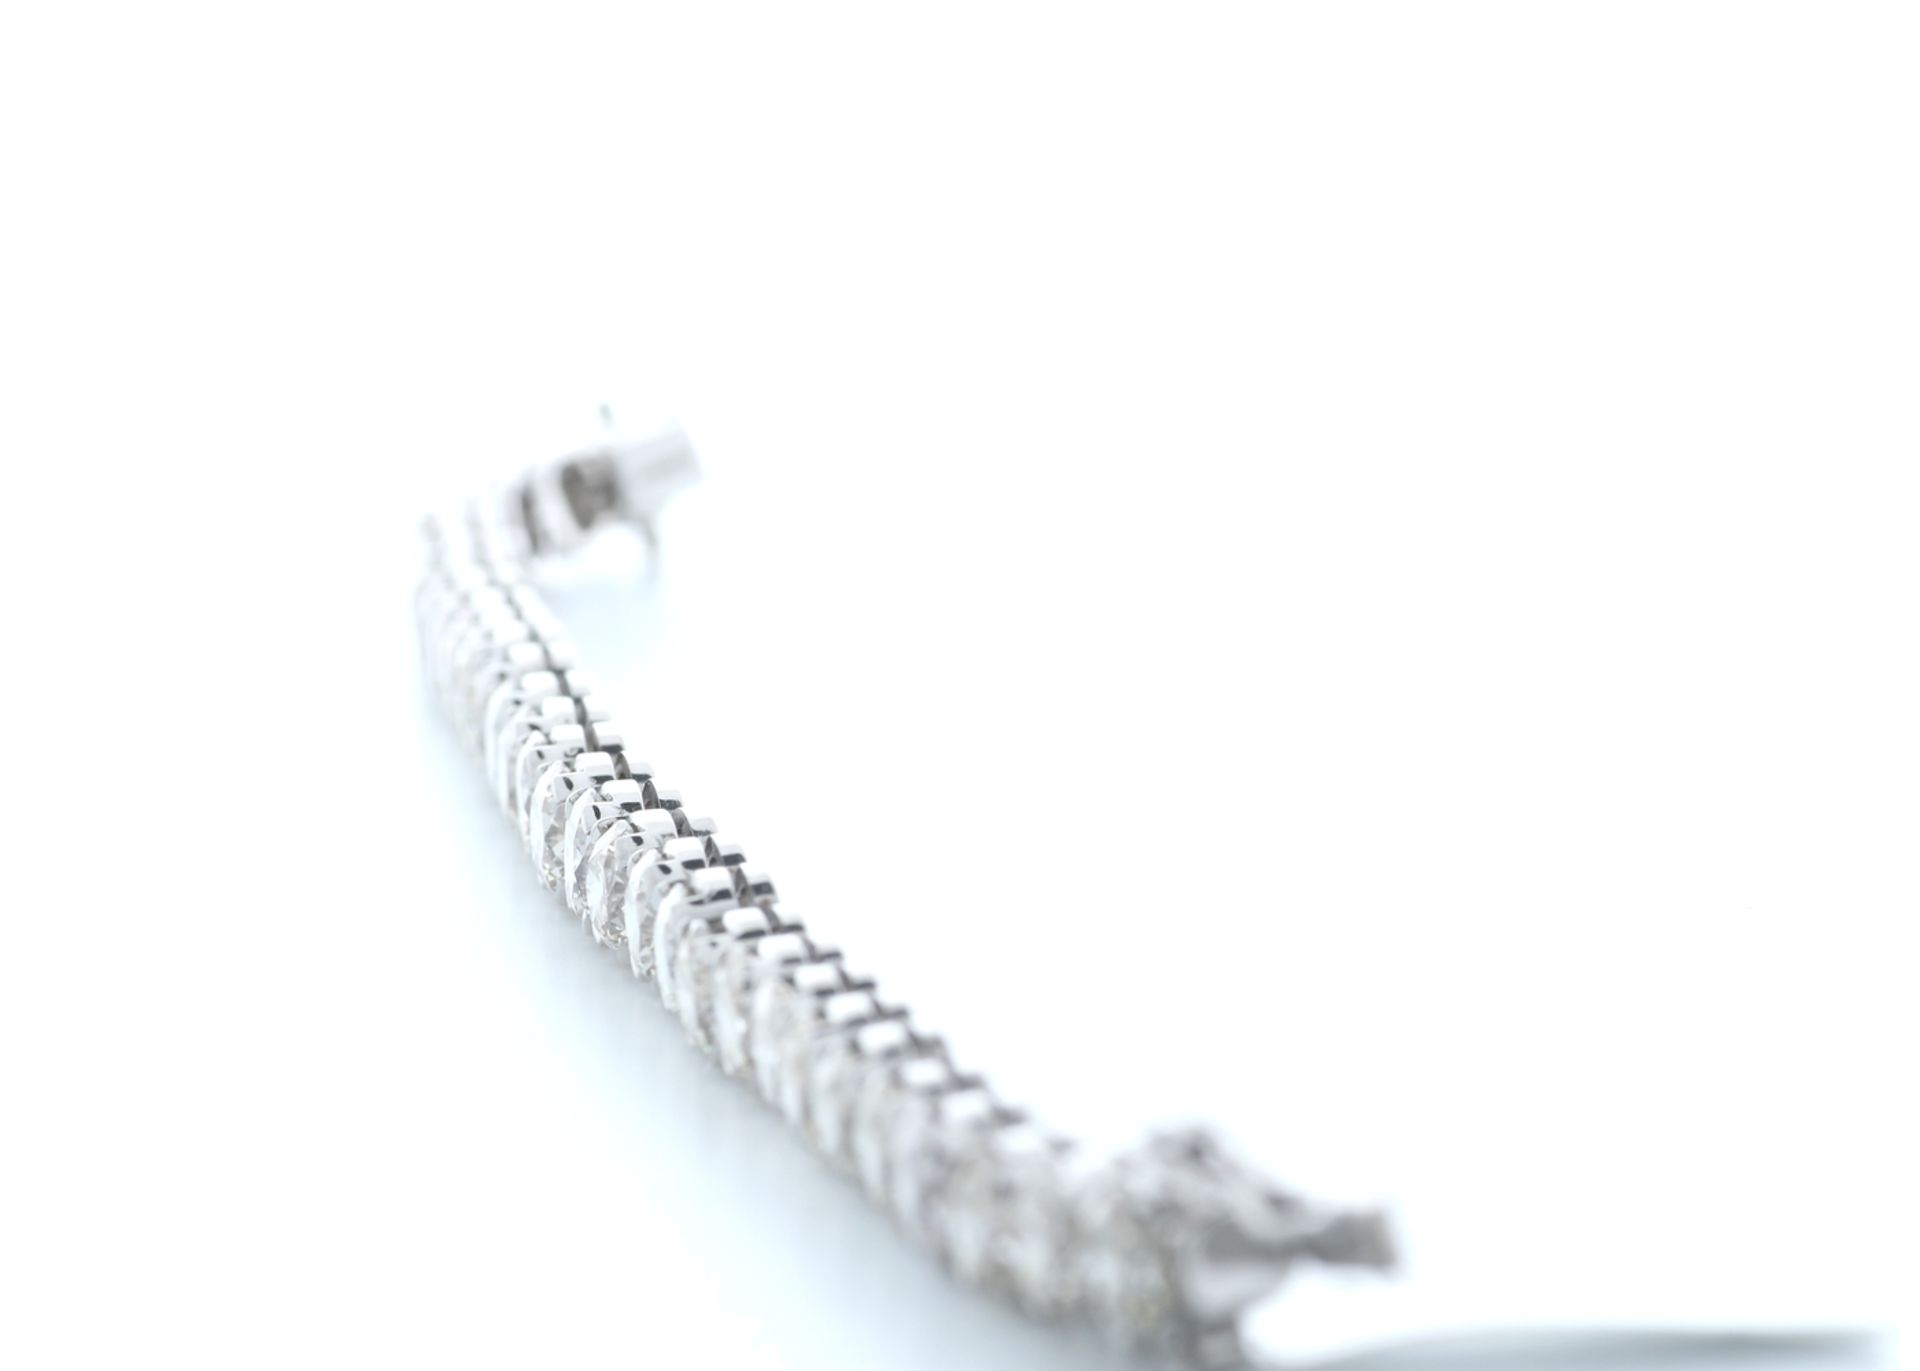 18ct White Gold Claw Set Diamond Tennis Bracelet 23.02 Carats Carats - Valued by IDI £165,000.00 - - Image 2 of 5